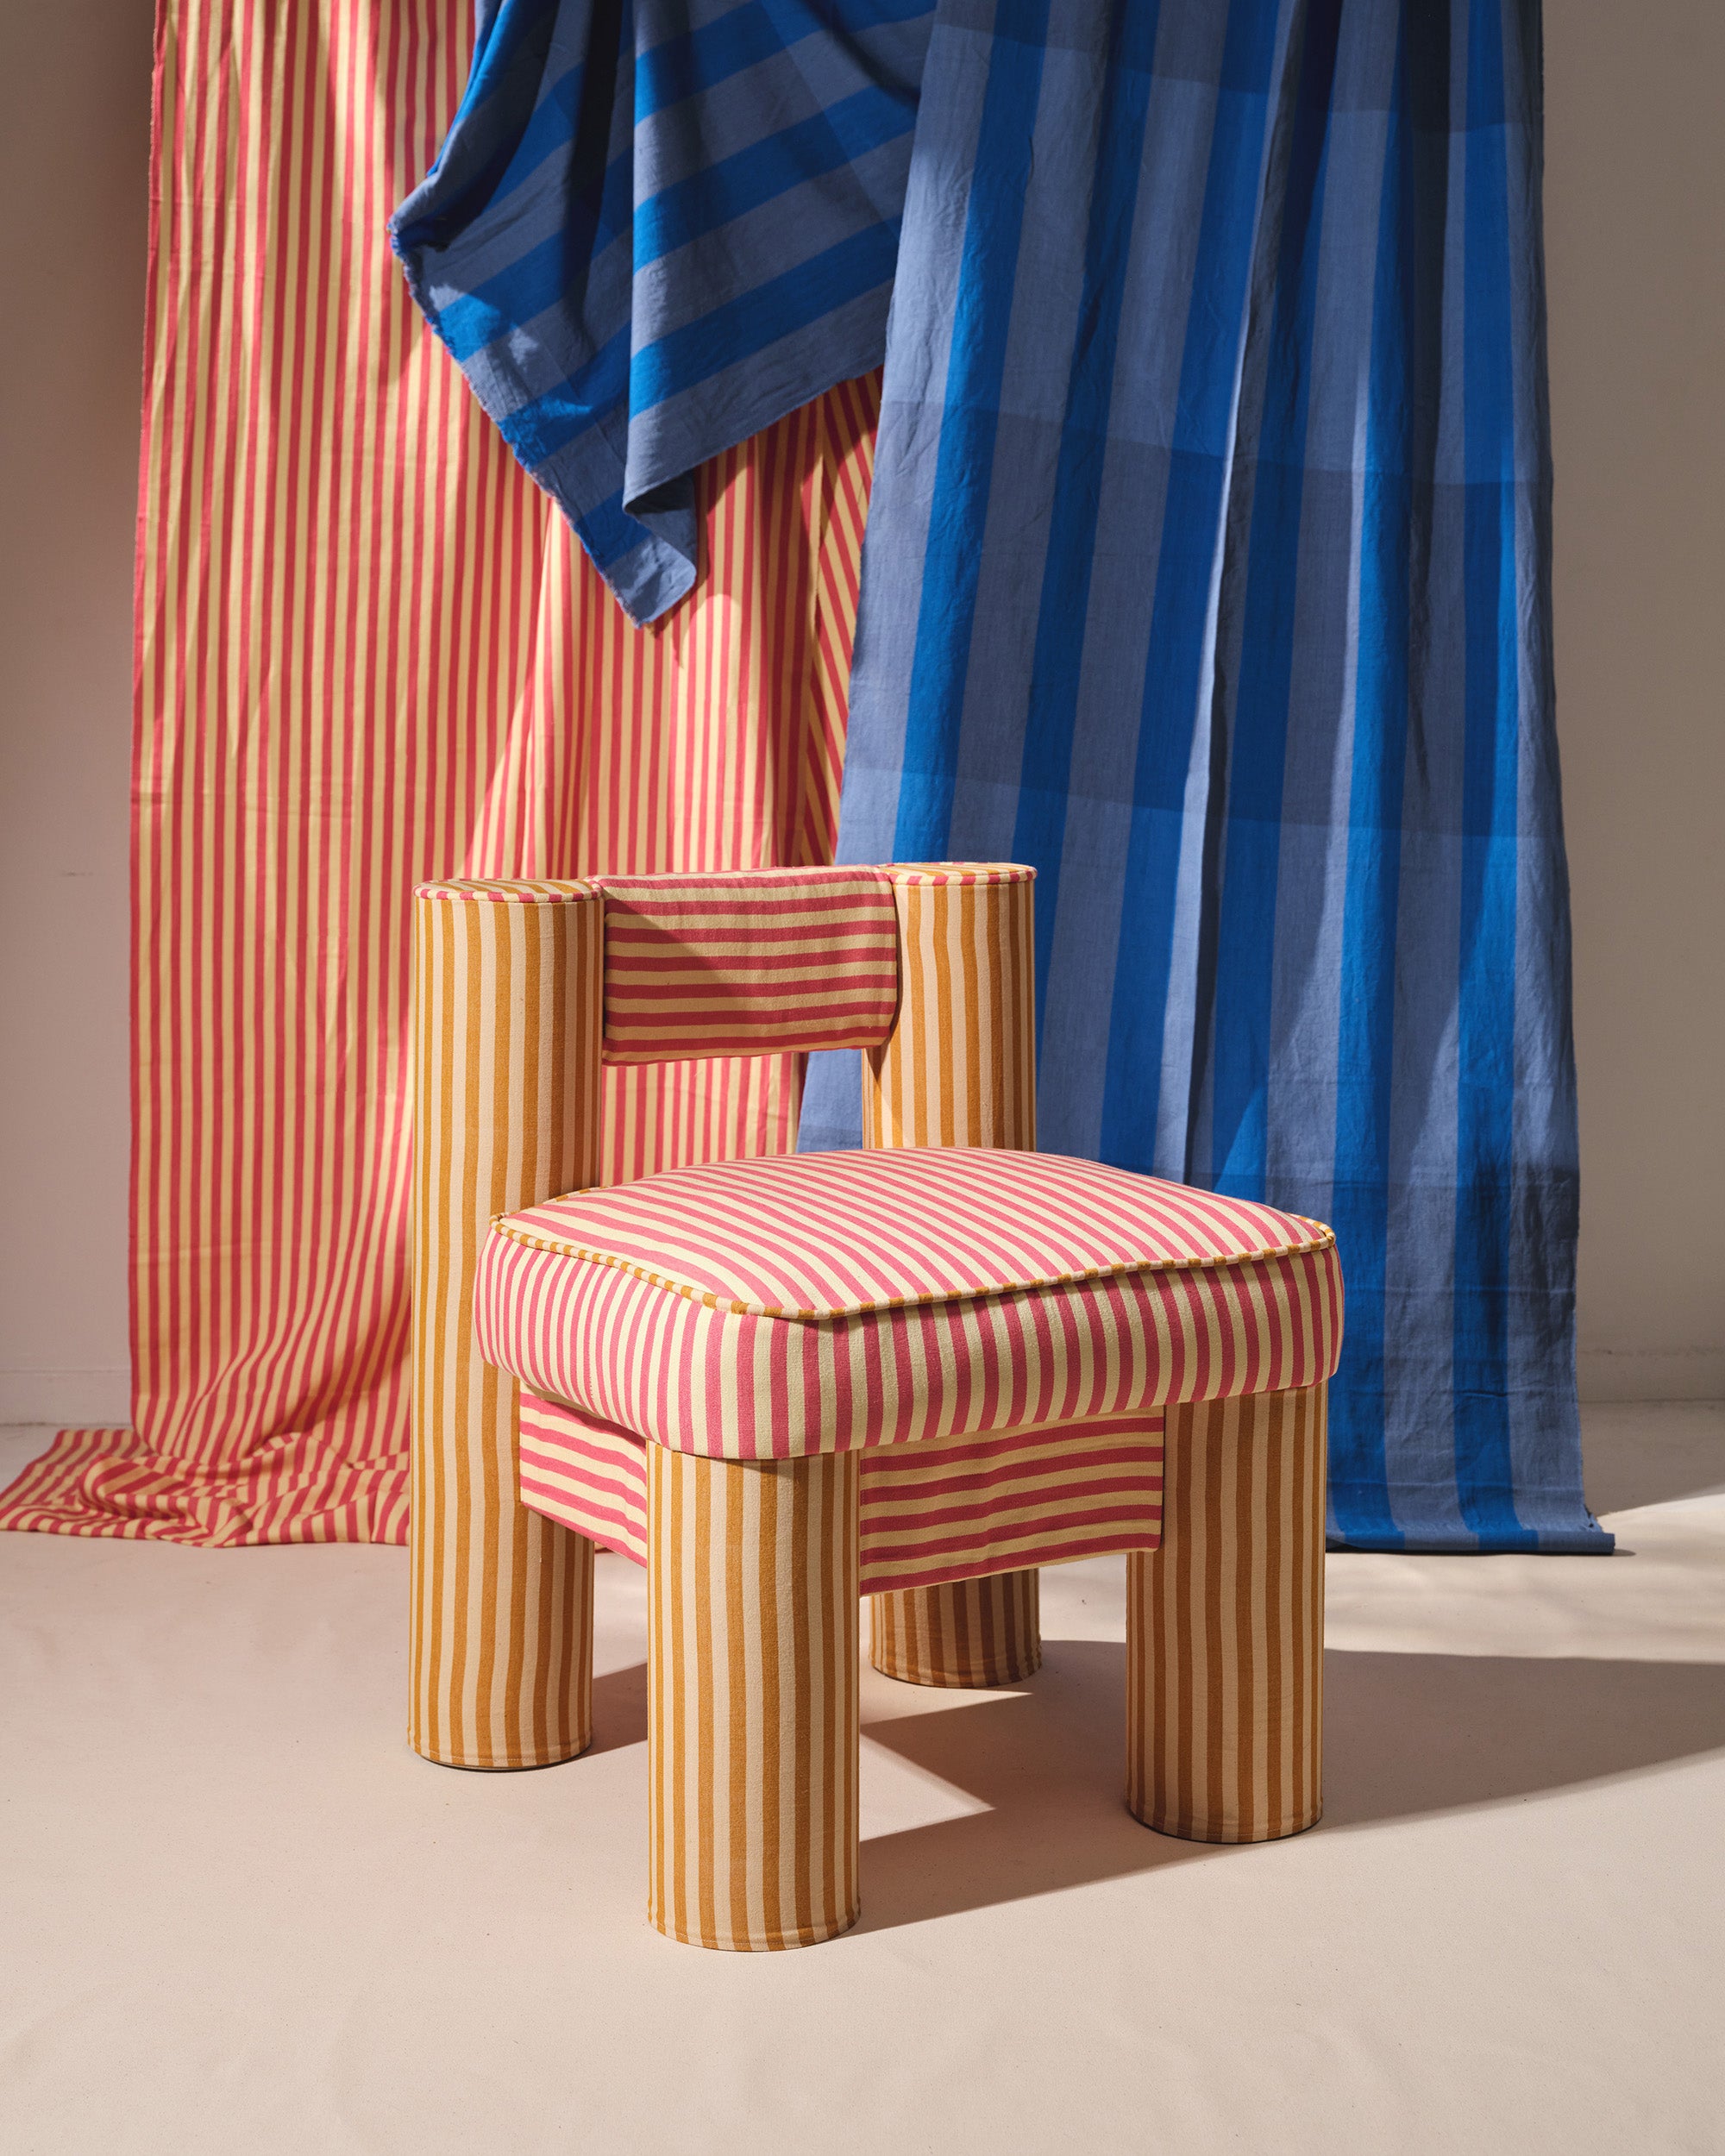 The CRCL LikeMindedObjects x MINNA chair is ethically handwoven brightly colored striped pink and golden yellow fabrics